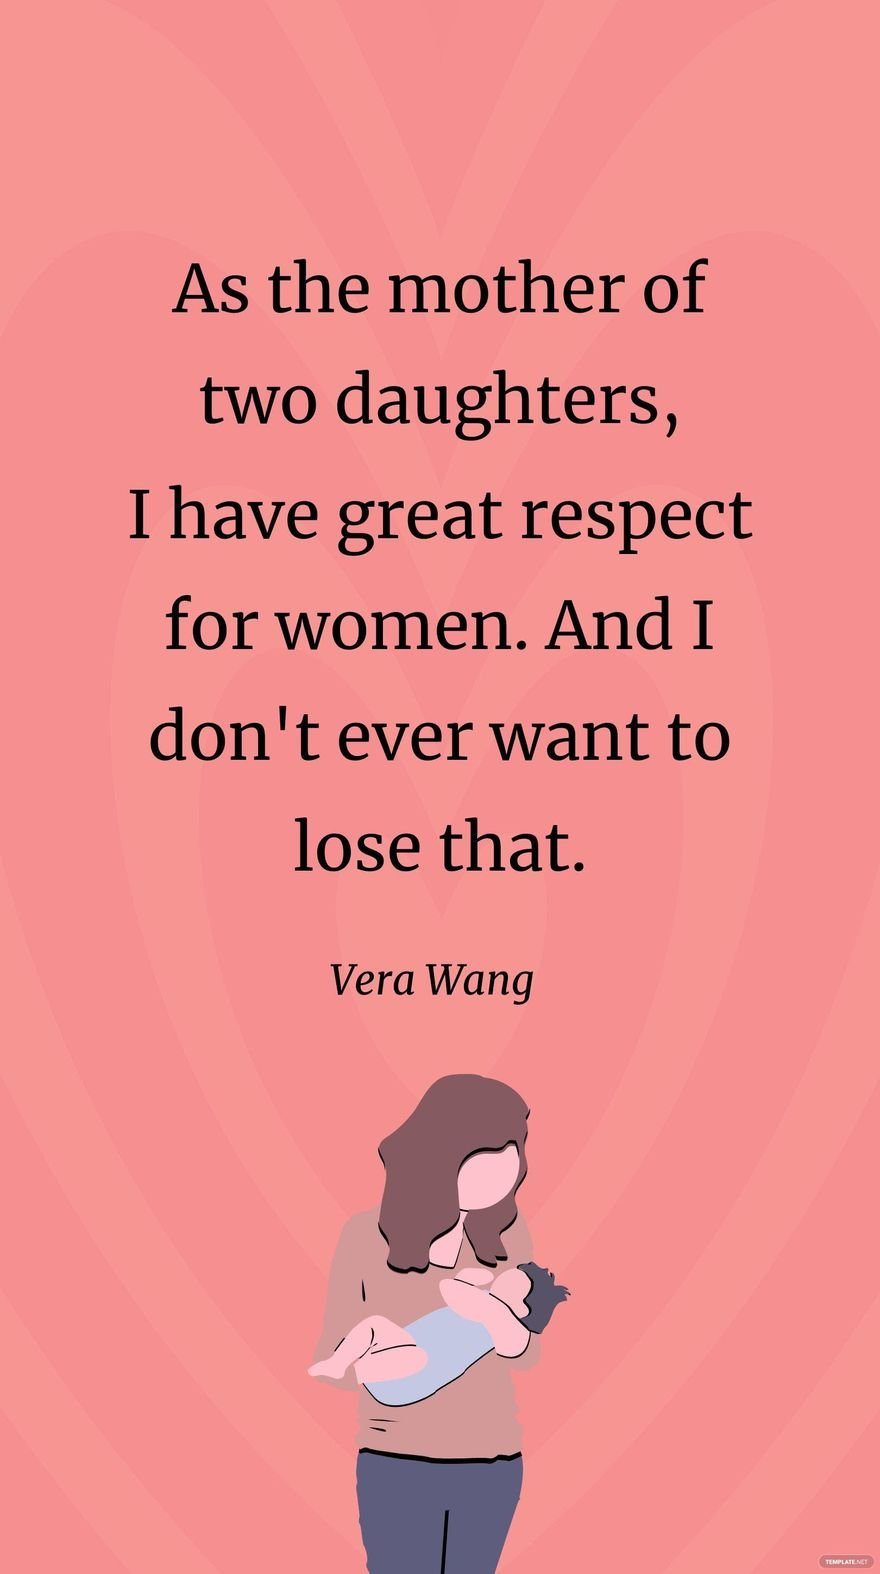 Vera Wang- As the mother of two daughters, I have great respect for women. And I don't ever want to lose that.